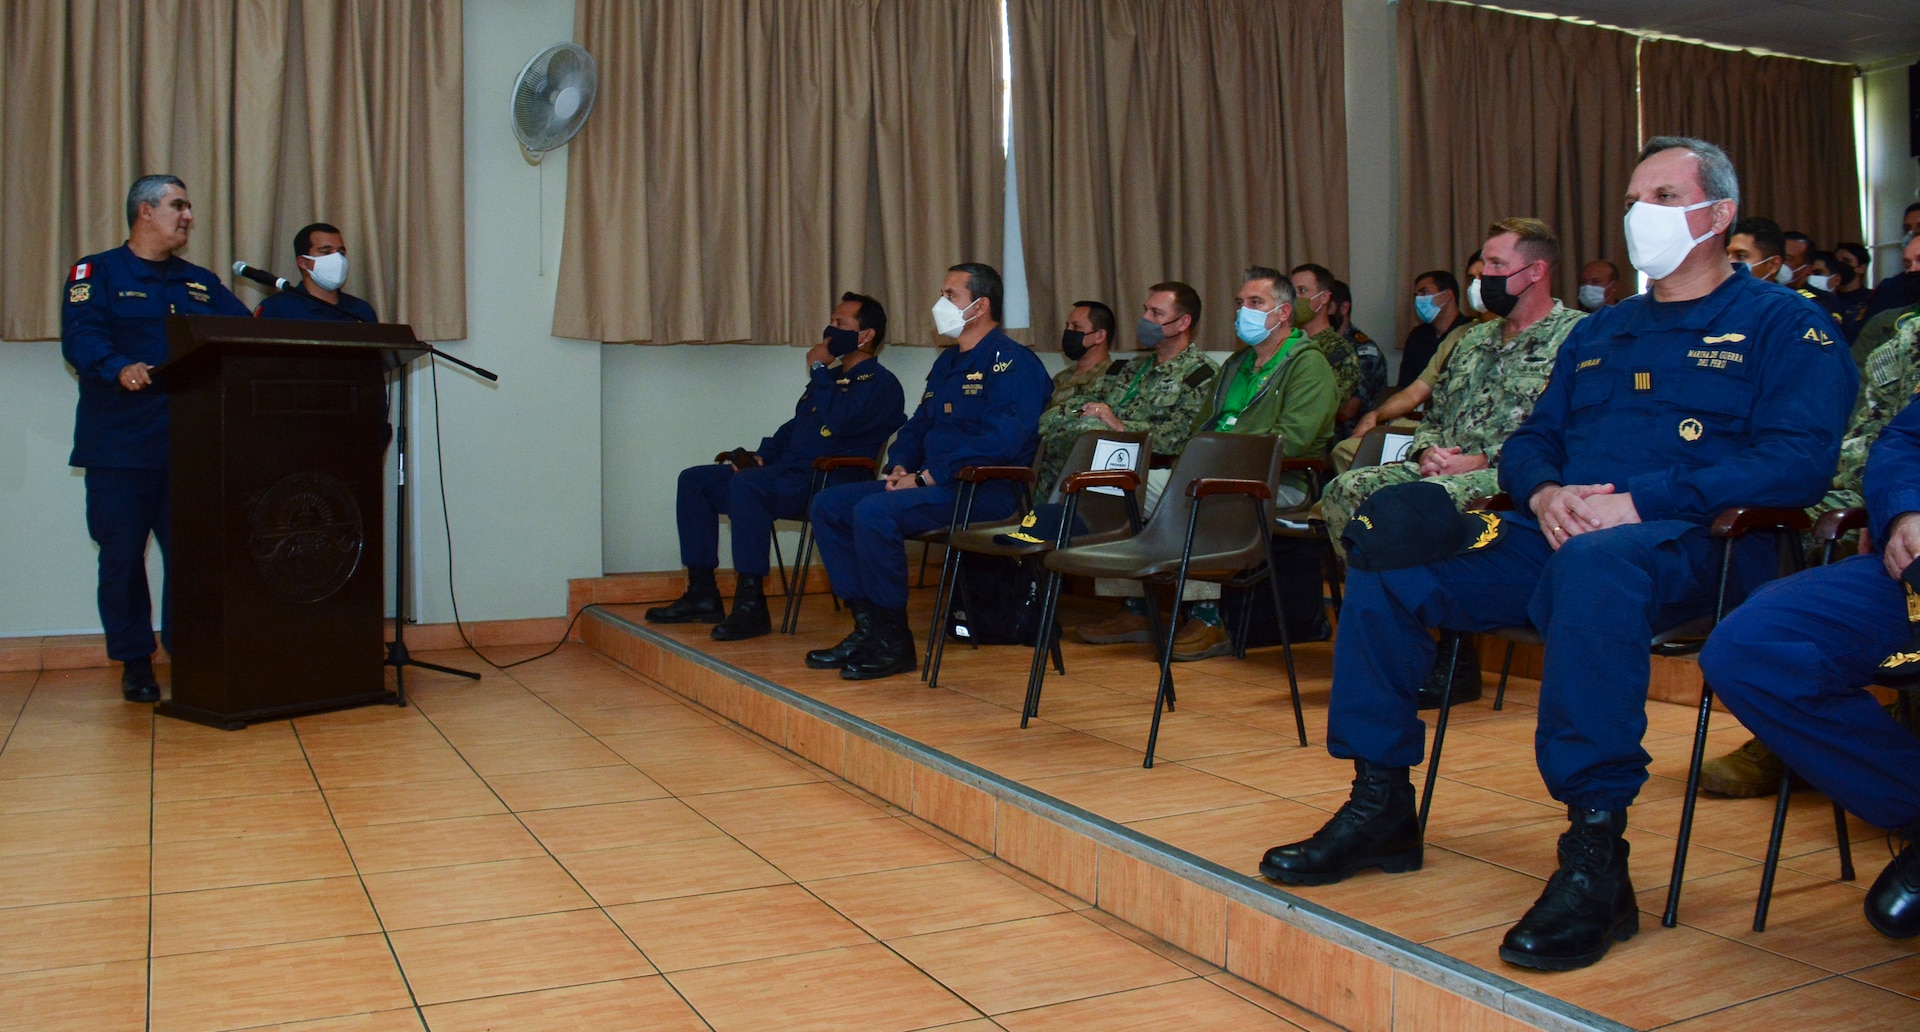 Peruvian Navy Comandante Marco Antonio Montero Gallegos gives opening remarks during the closing ceremony for Silent Forces Exercise (SIFOREX) 2021 at Callao Naval Base, Sept. 24, 2021.